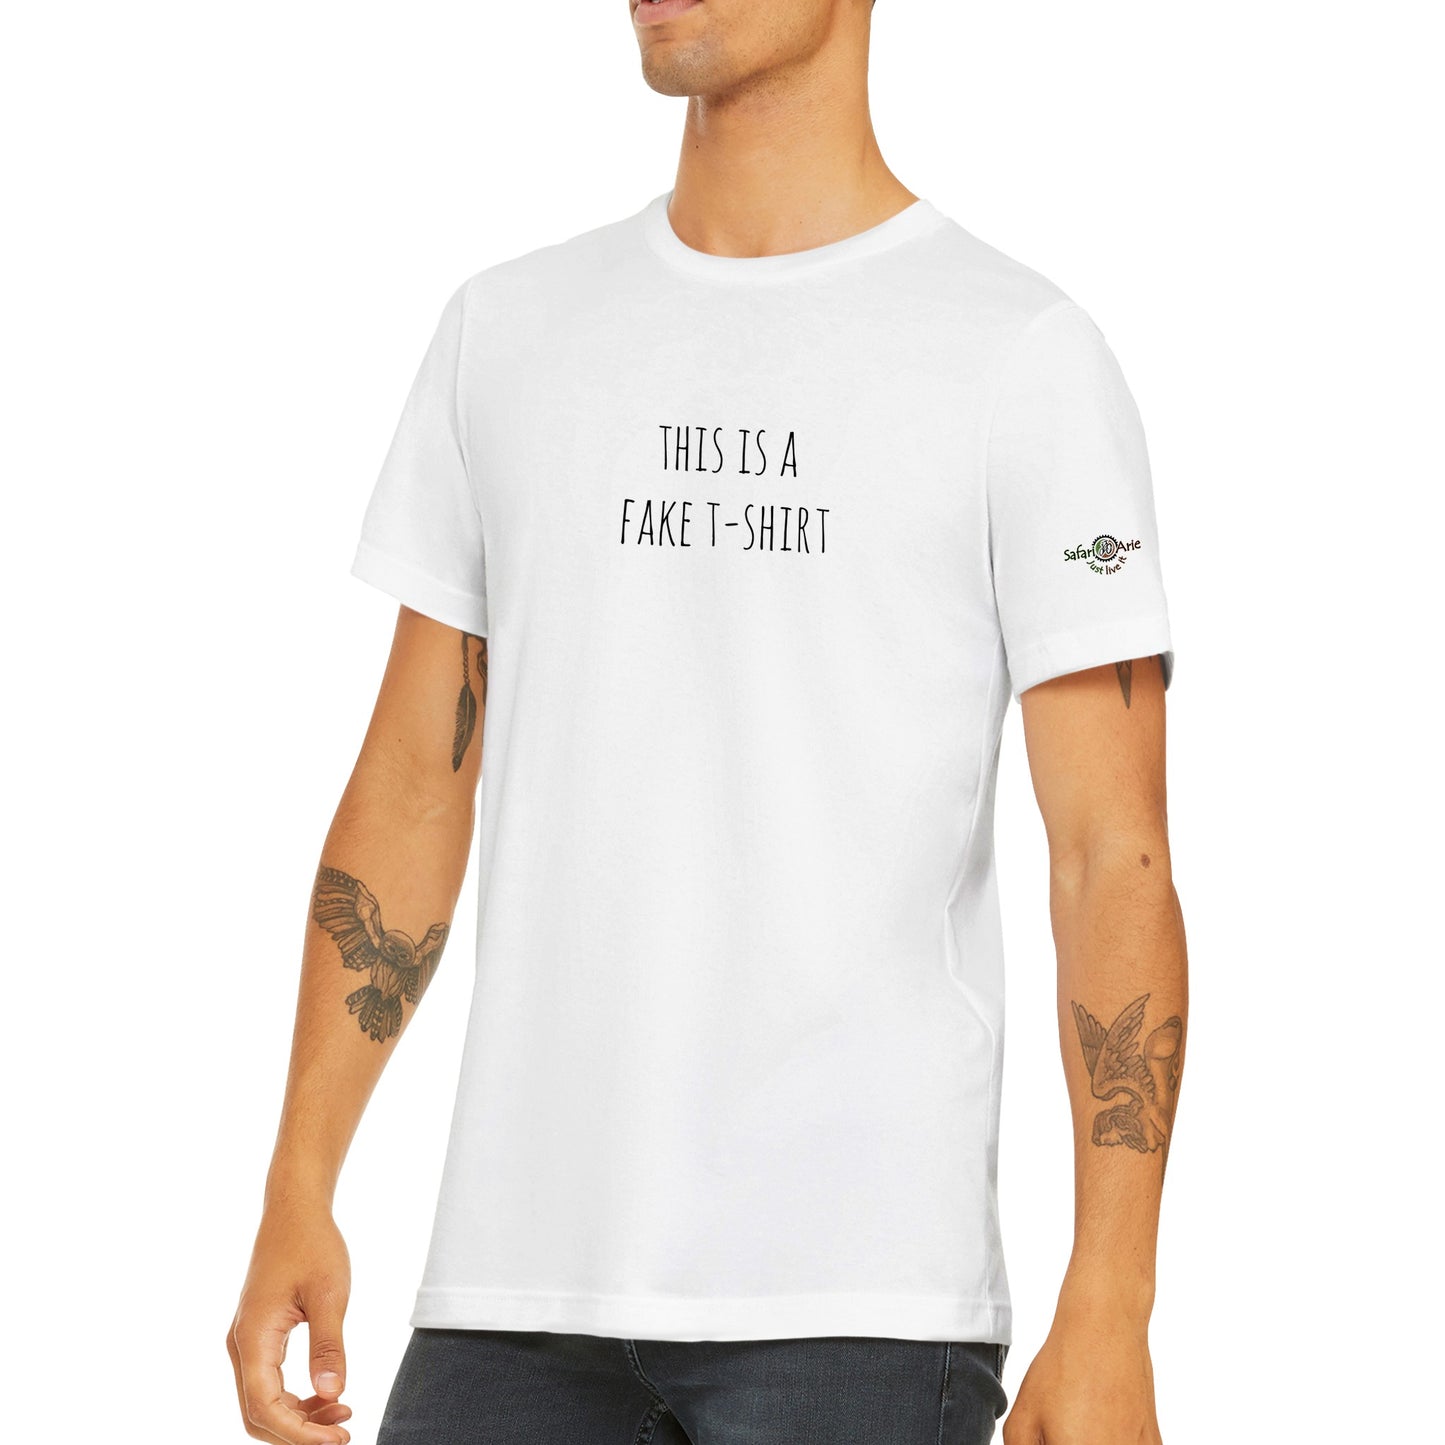 This is a fake t-shirt - unisex